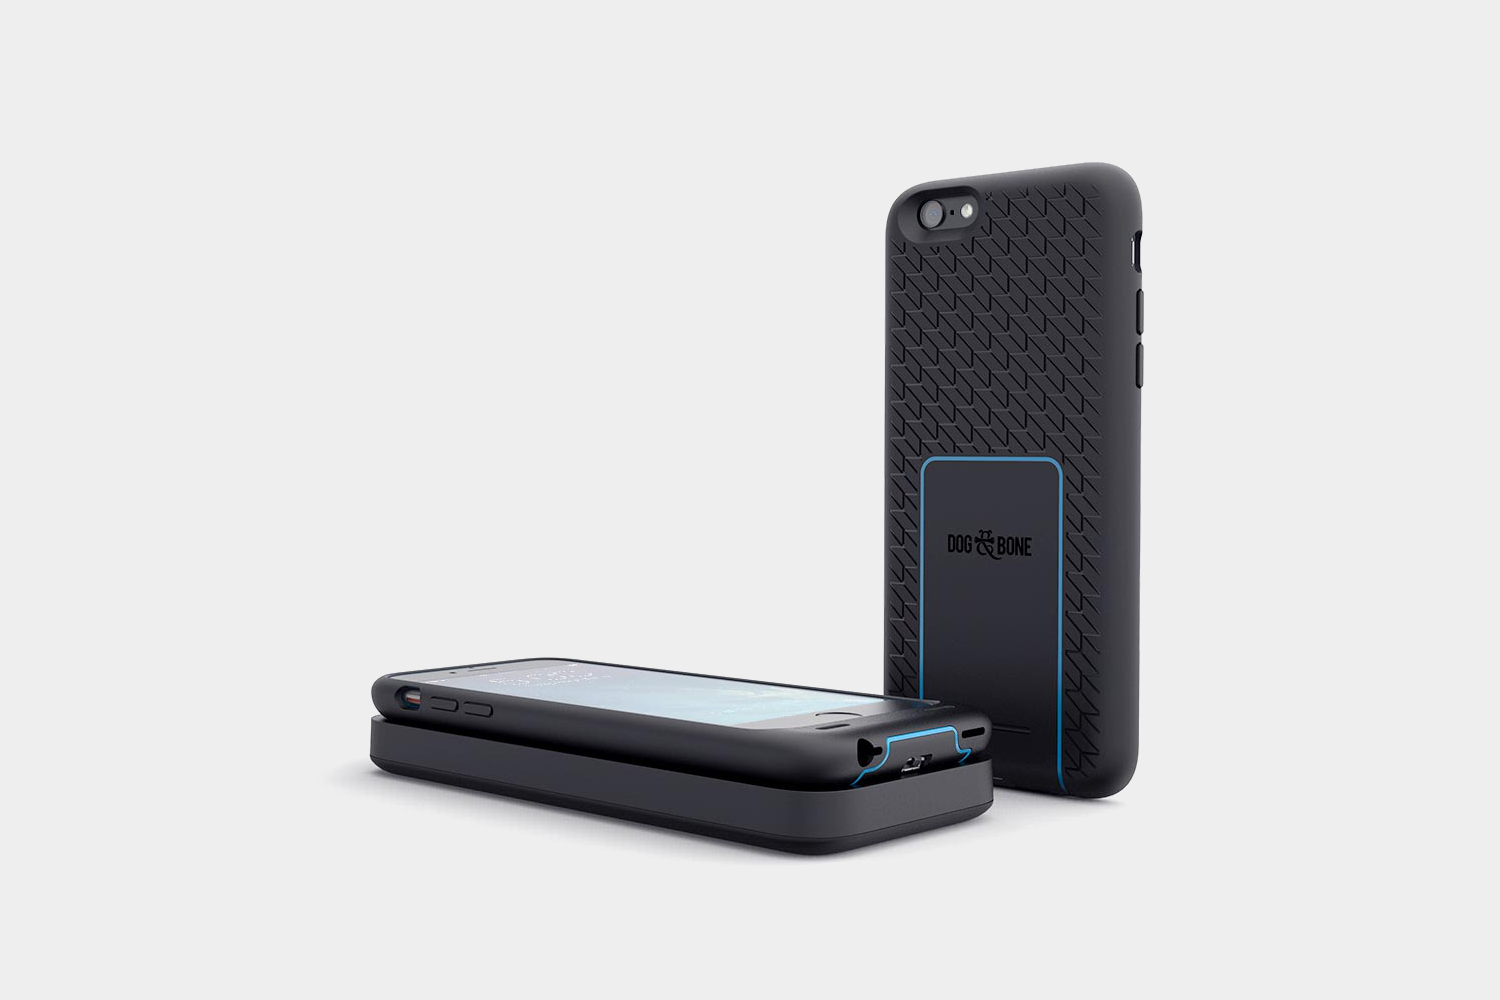 Wireless Charging Case for the iPhone 6 Plus / 6S Plus case